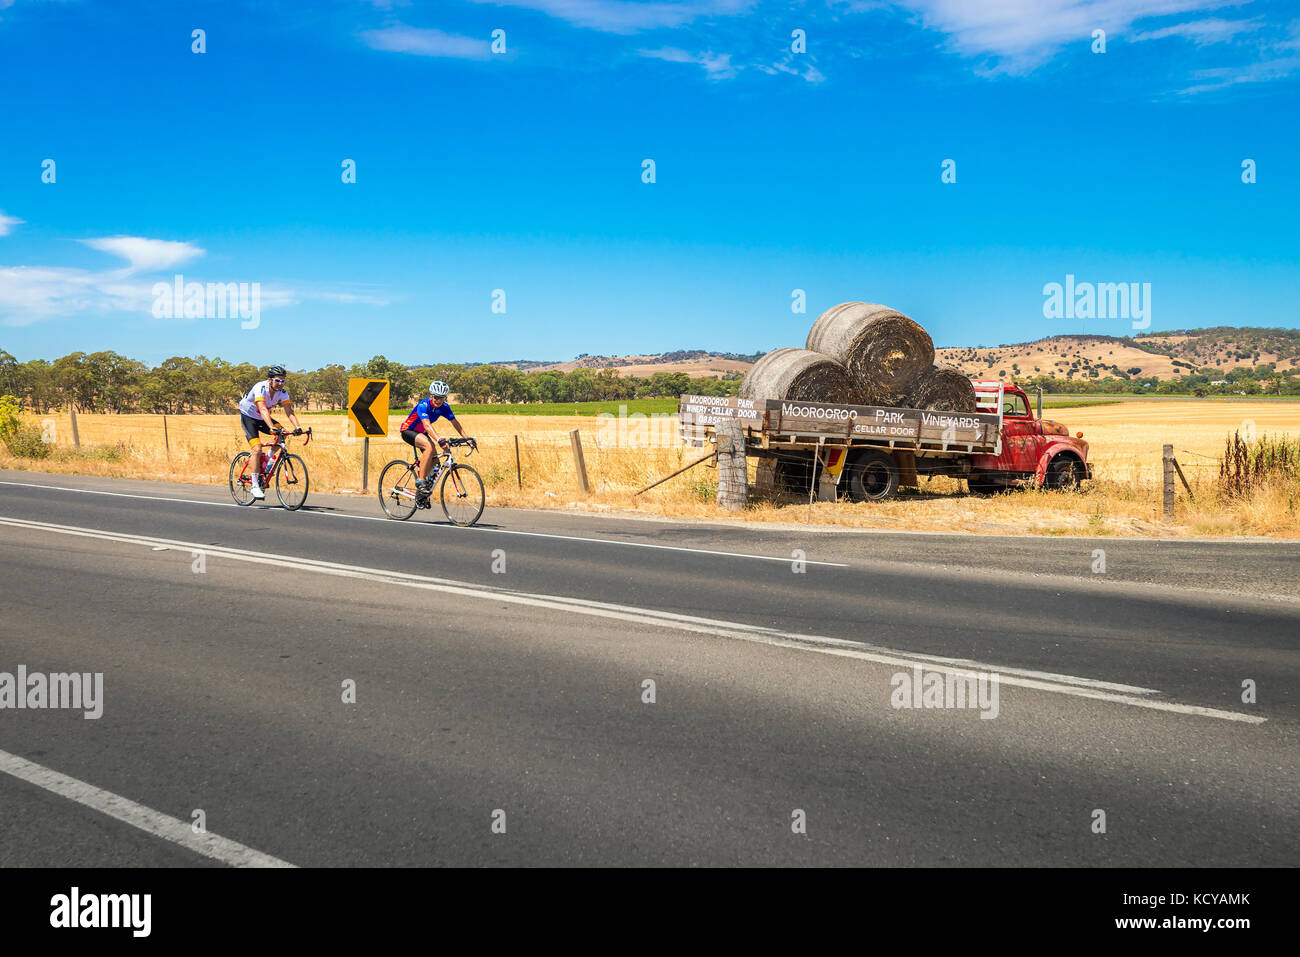 Tanunda, South Australia - January 16, 2016: Two men riding their bicycles along scenic road in Barossa valley near Moorooroo Park Vineyards Stock Photo